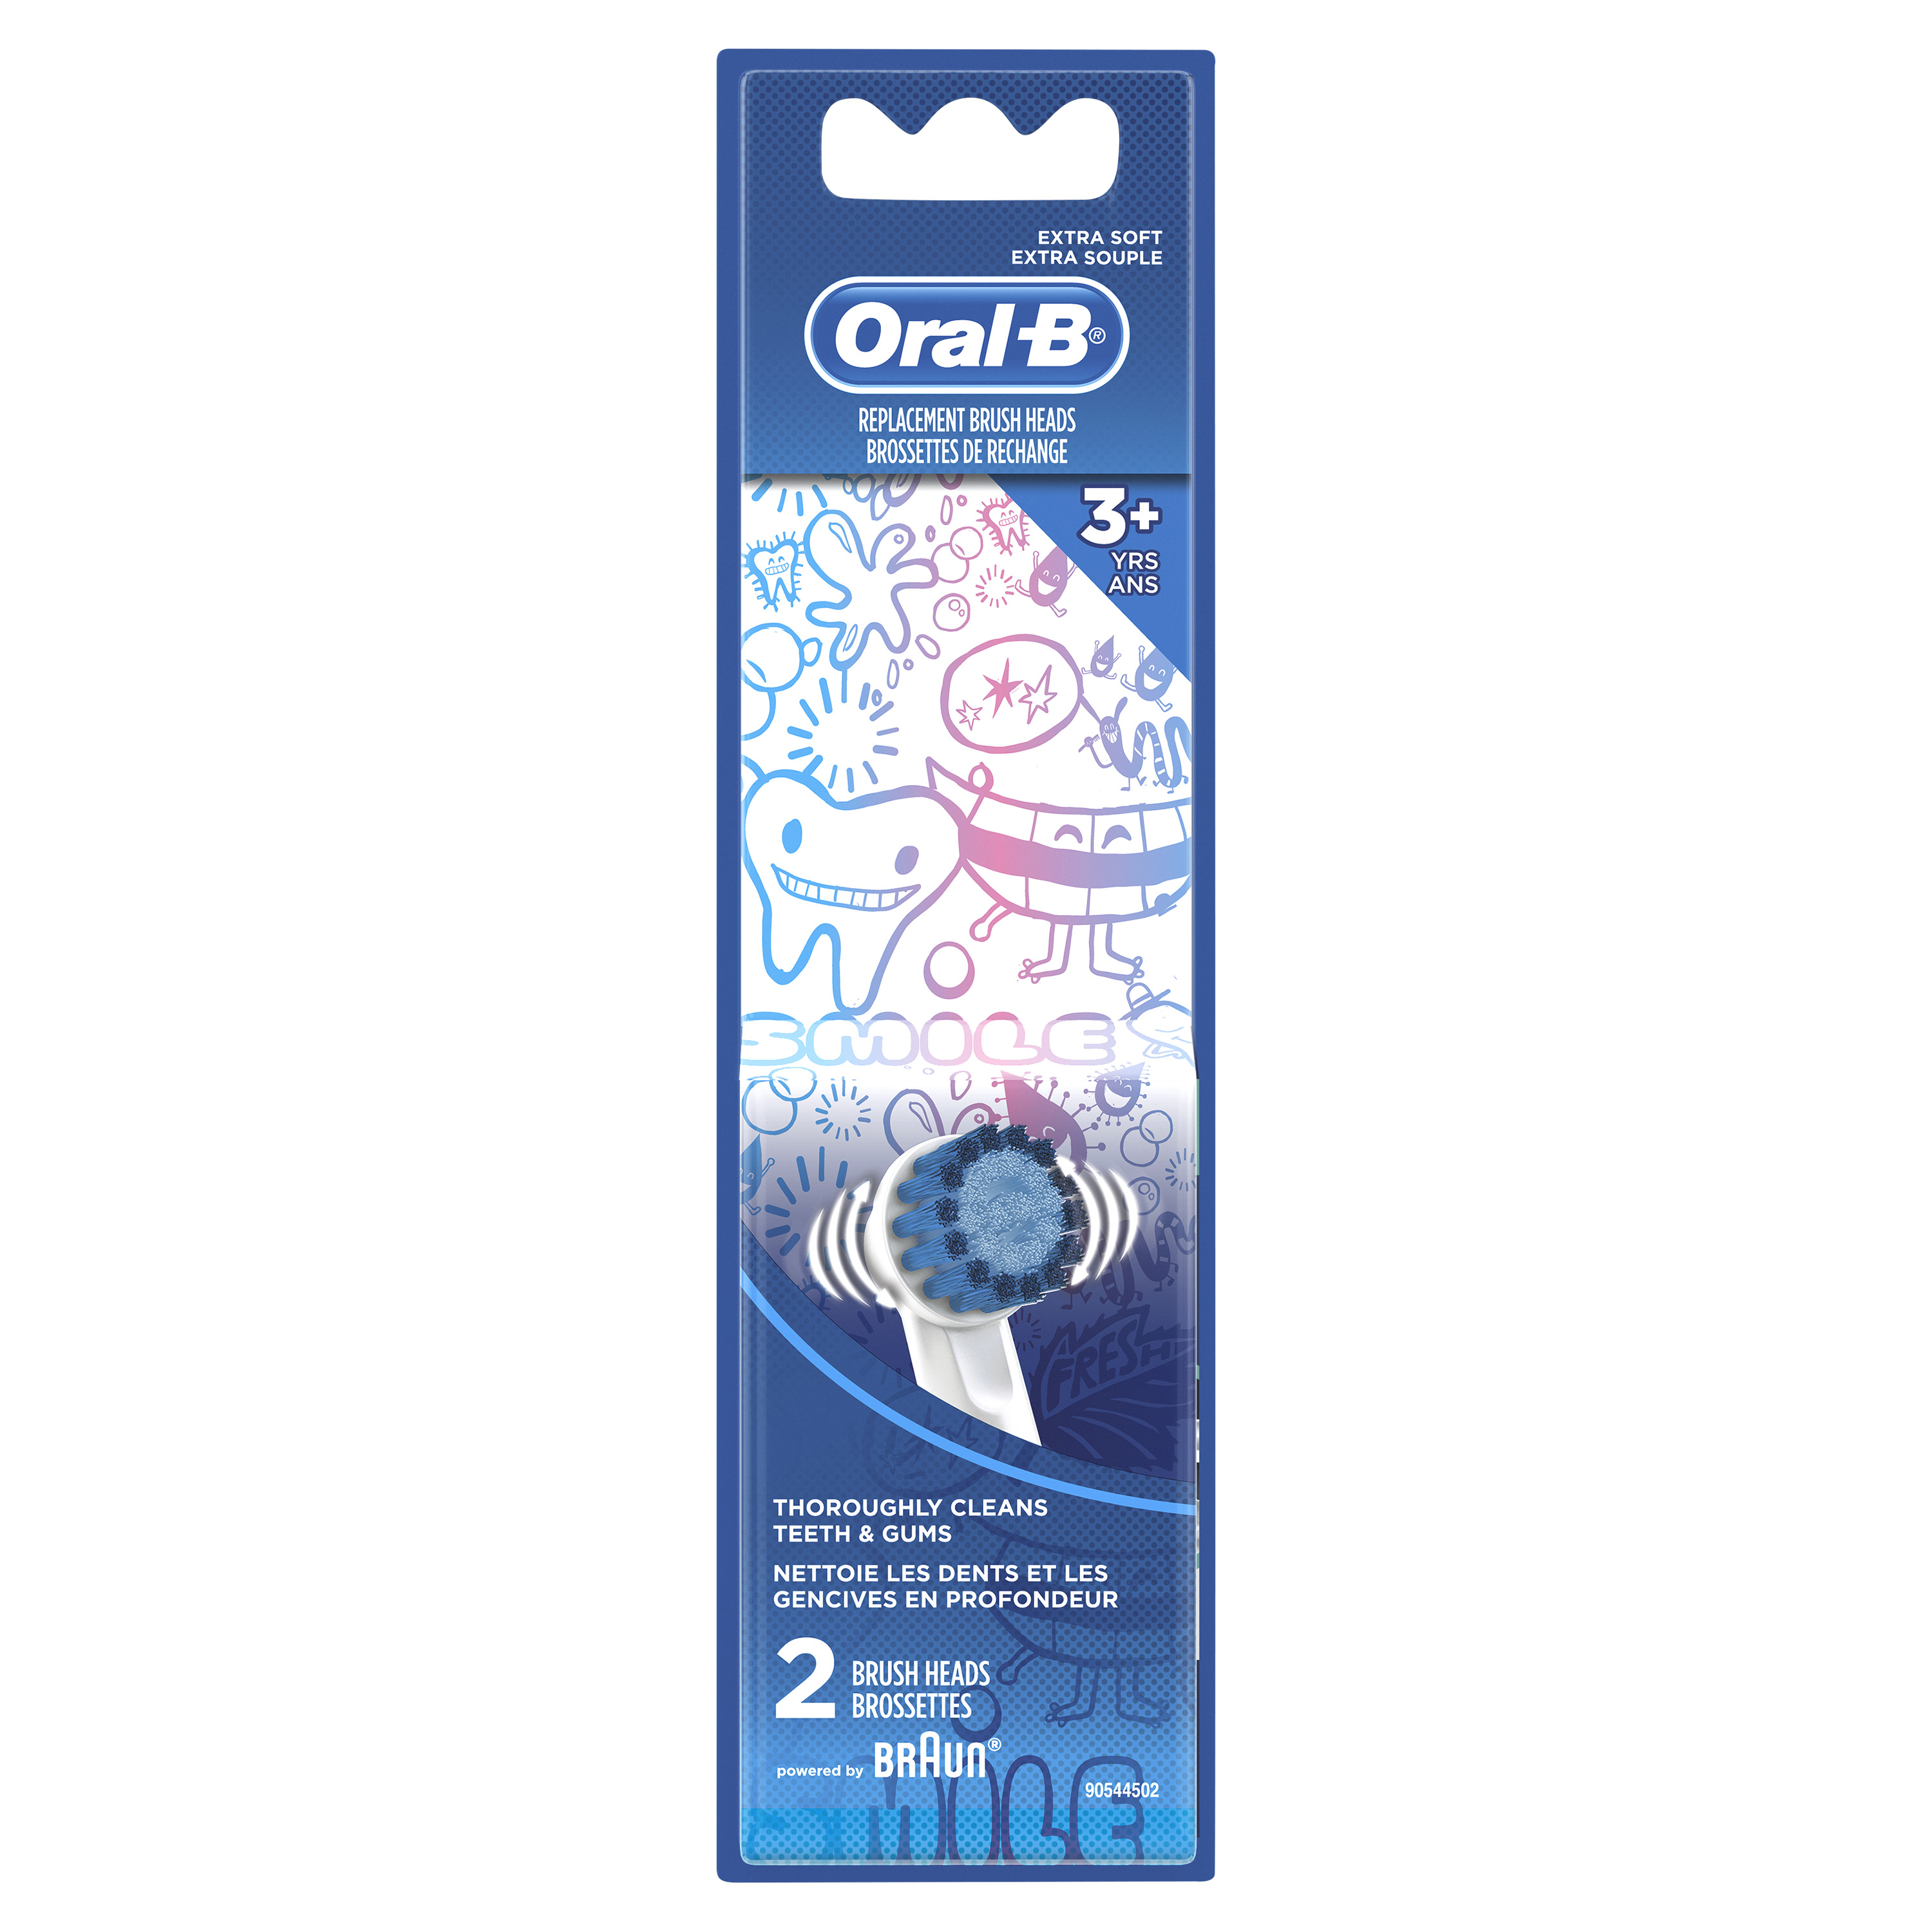 Oral-B Sensitive Gum Care Electric Toothbrush Brush Head, 2 Ct - image 1 of 6